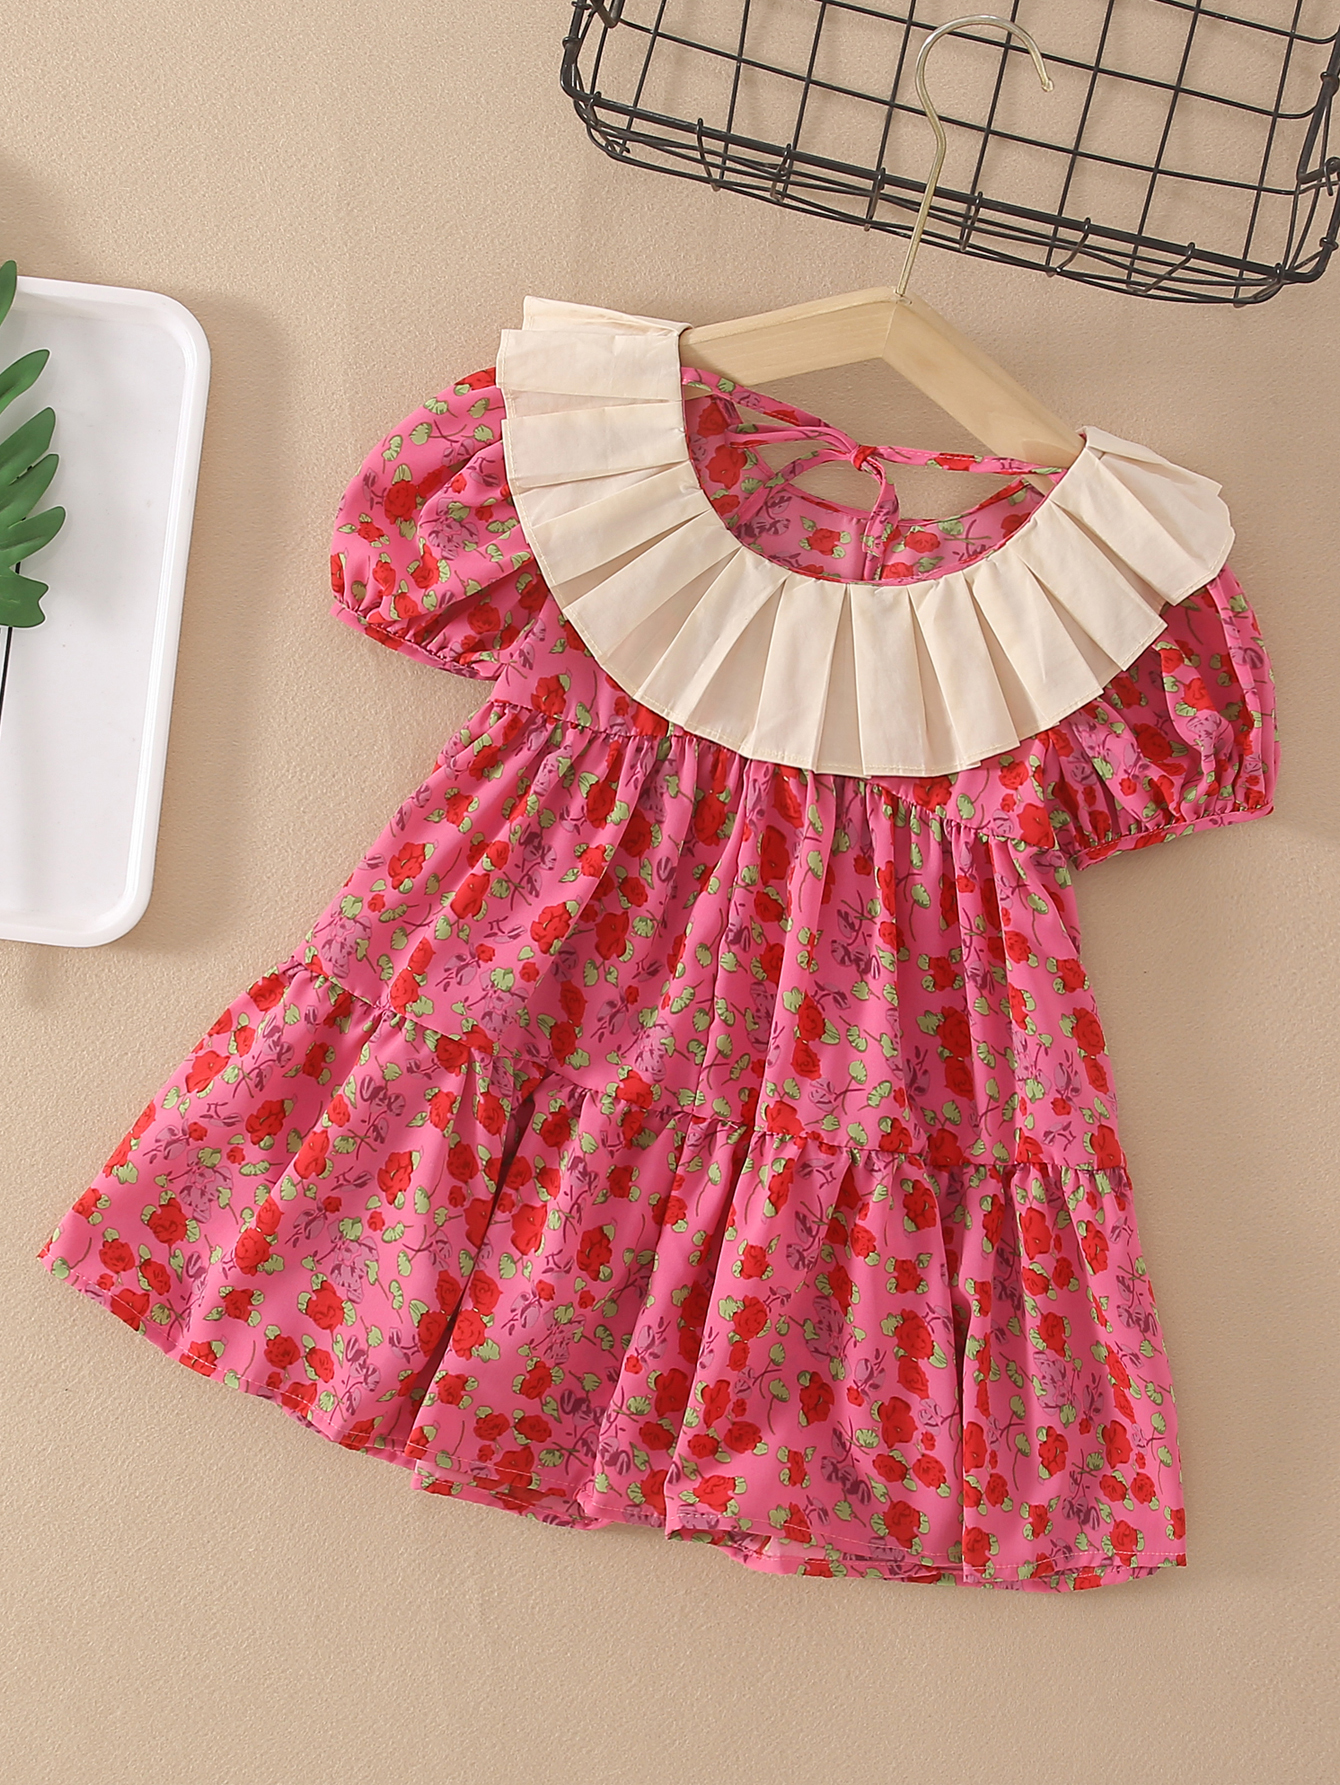 back lacing girls lord and taylor children's dresses for special occasions weeding online free sample